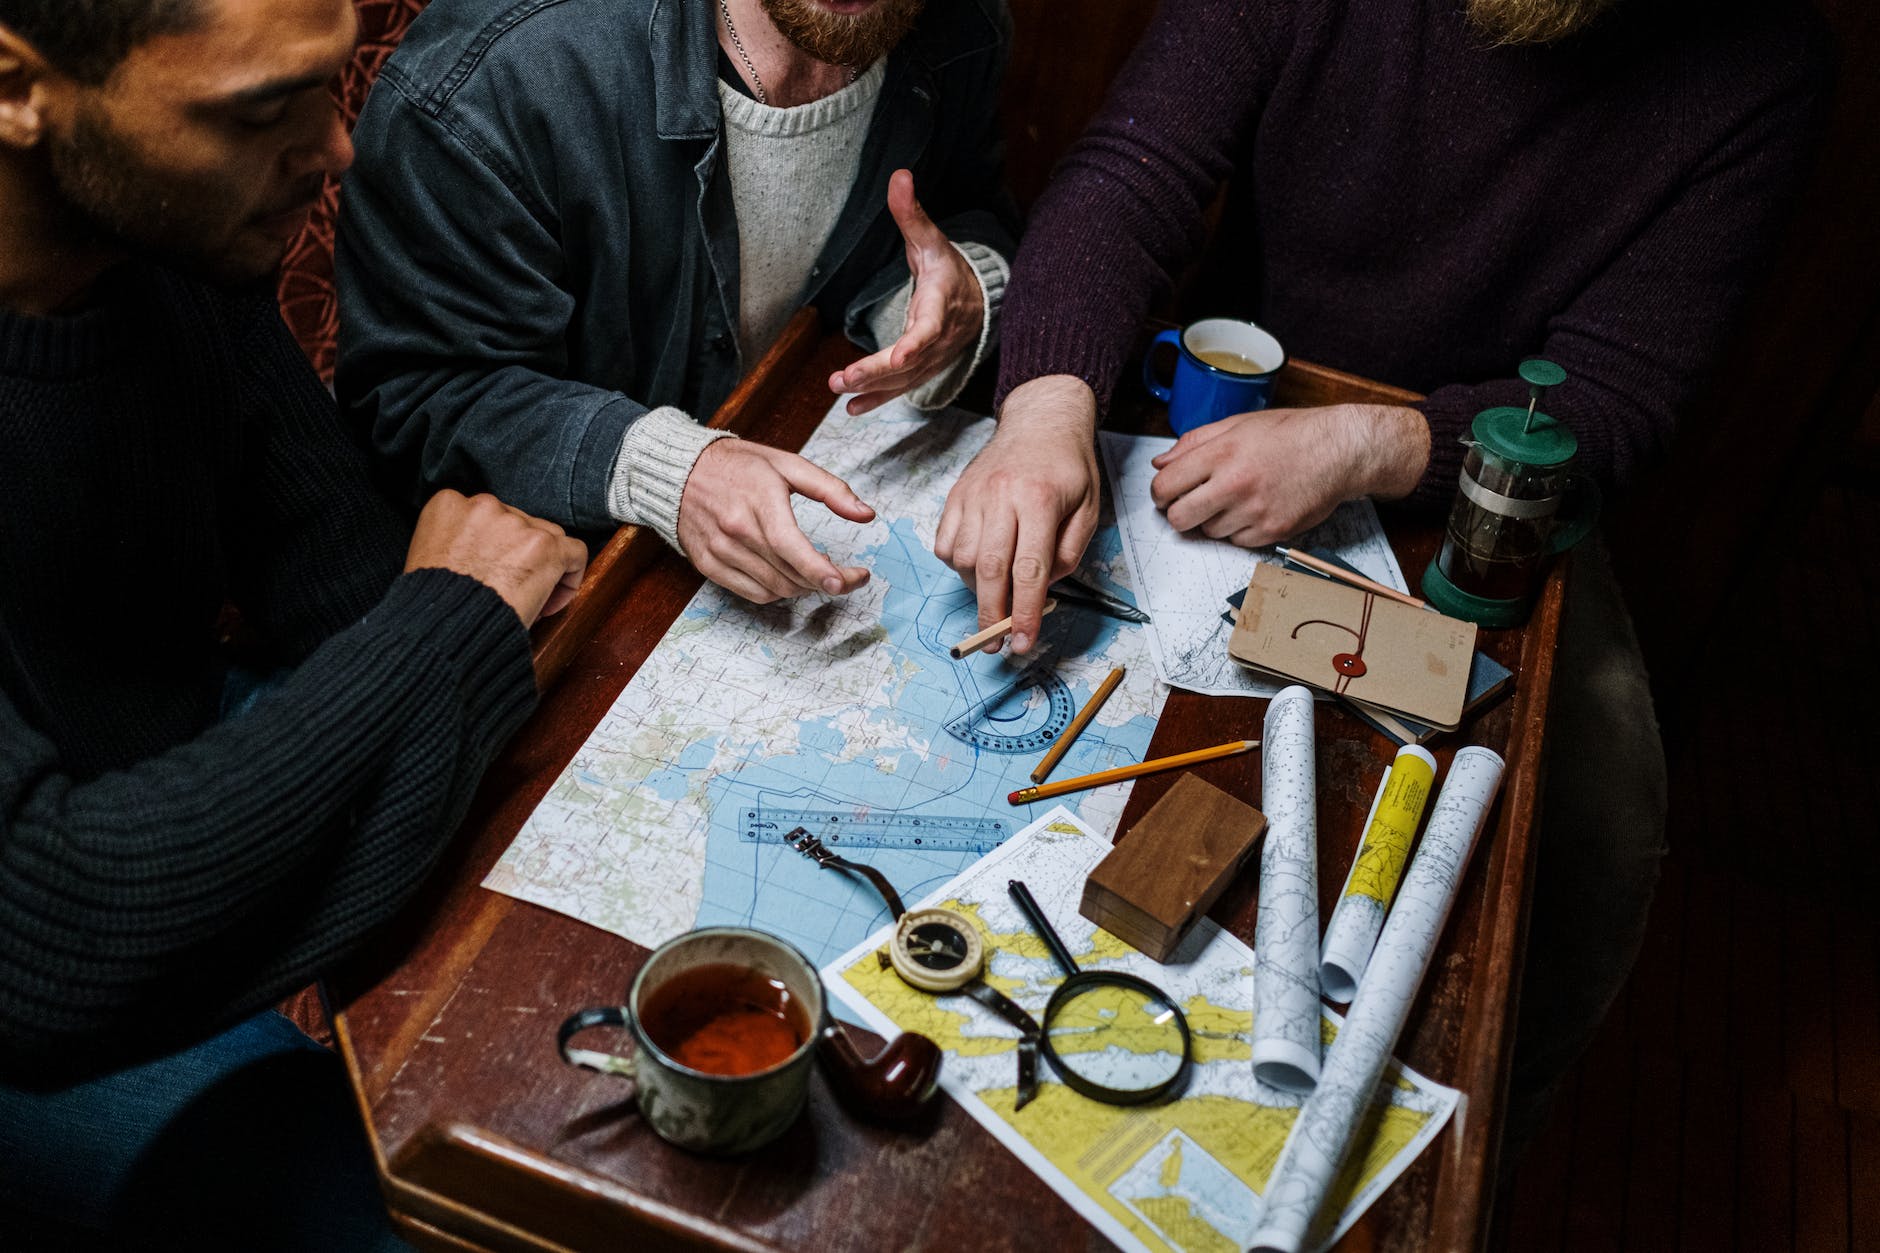 men planning a route using map